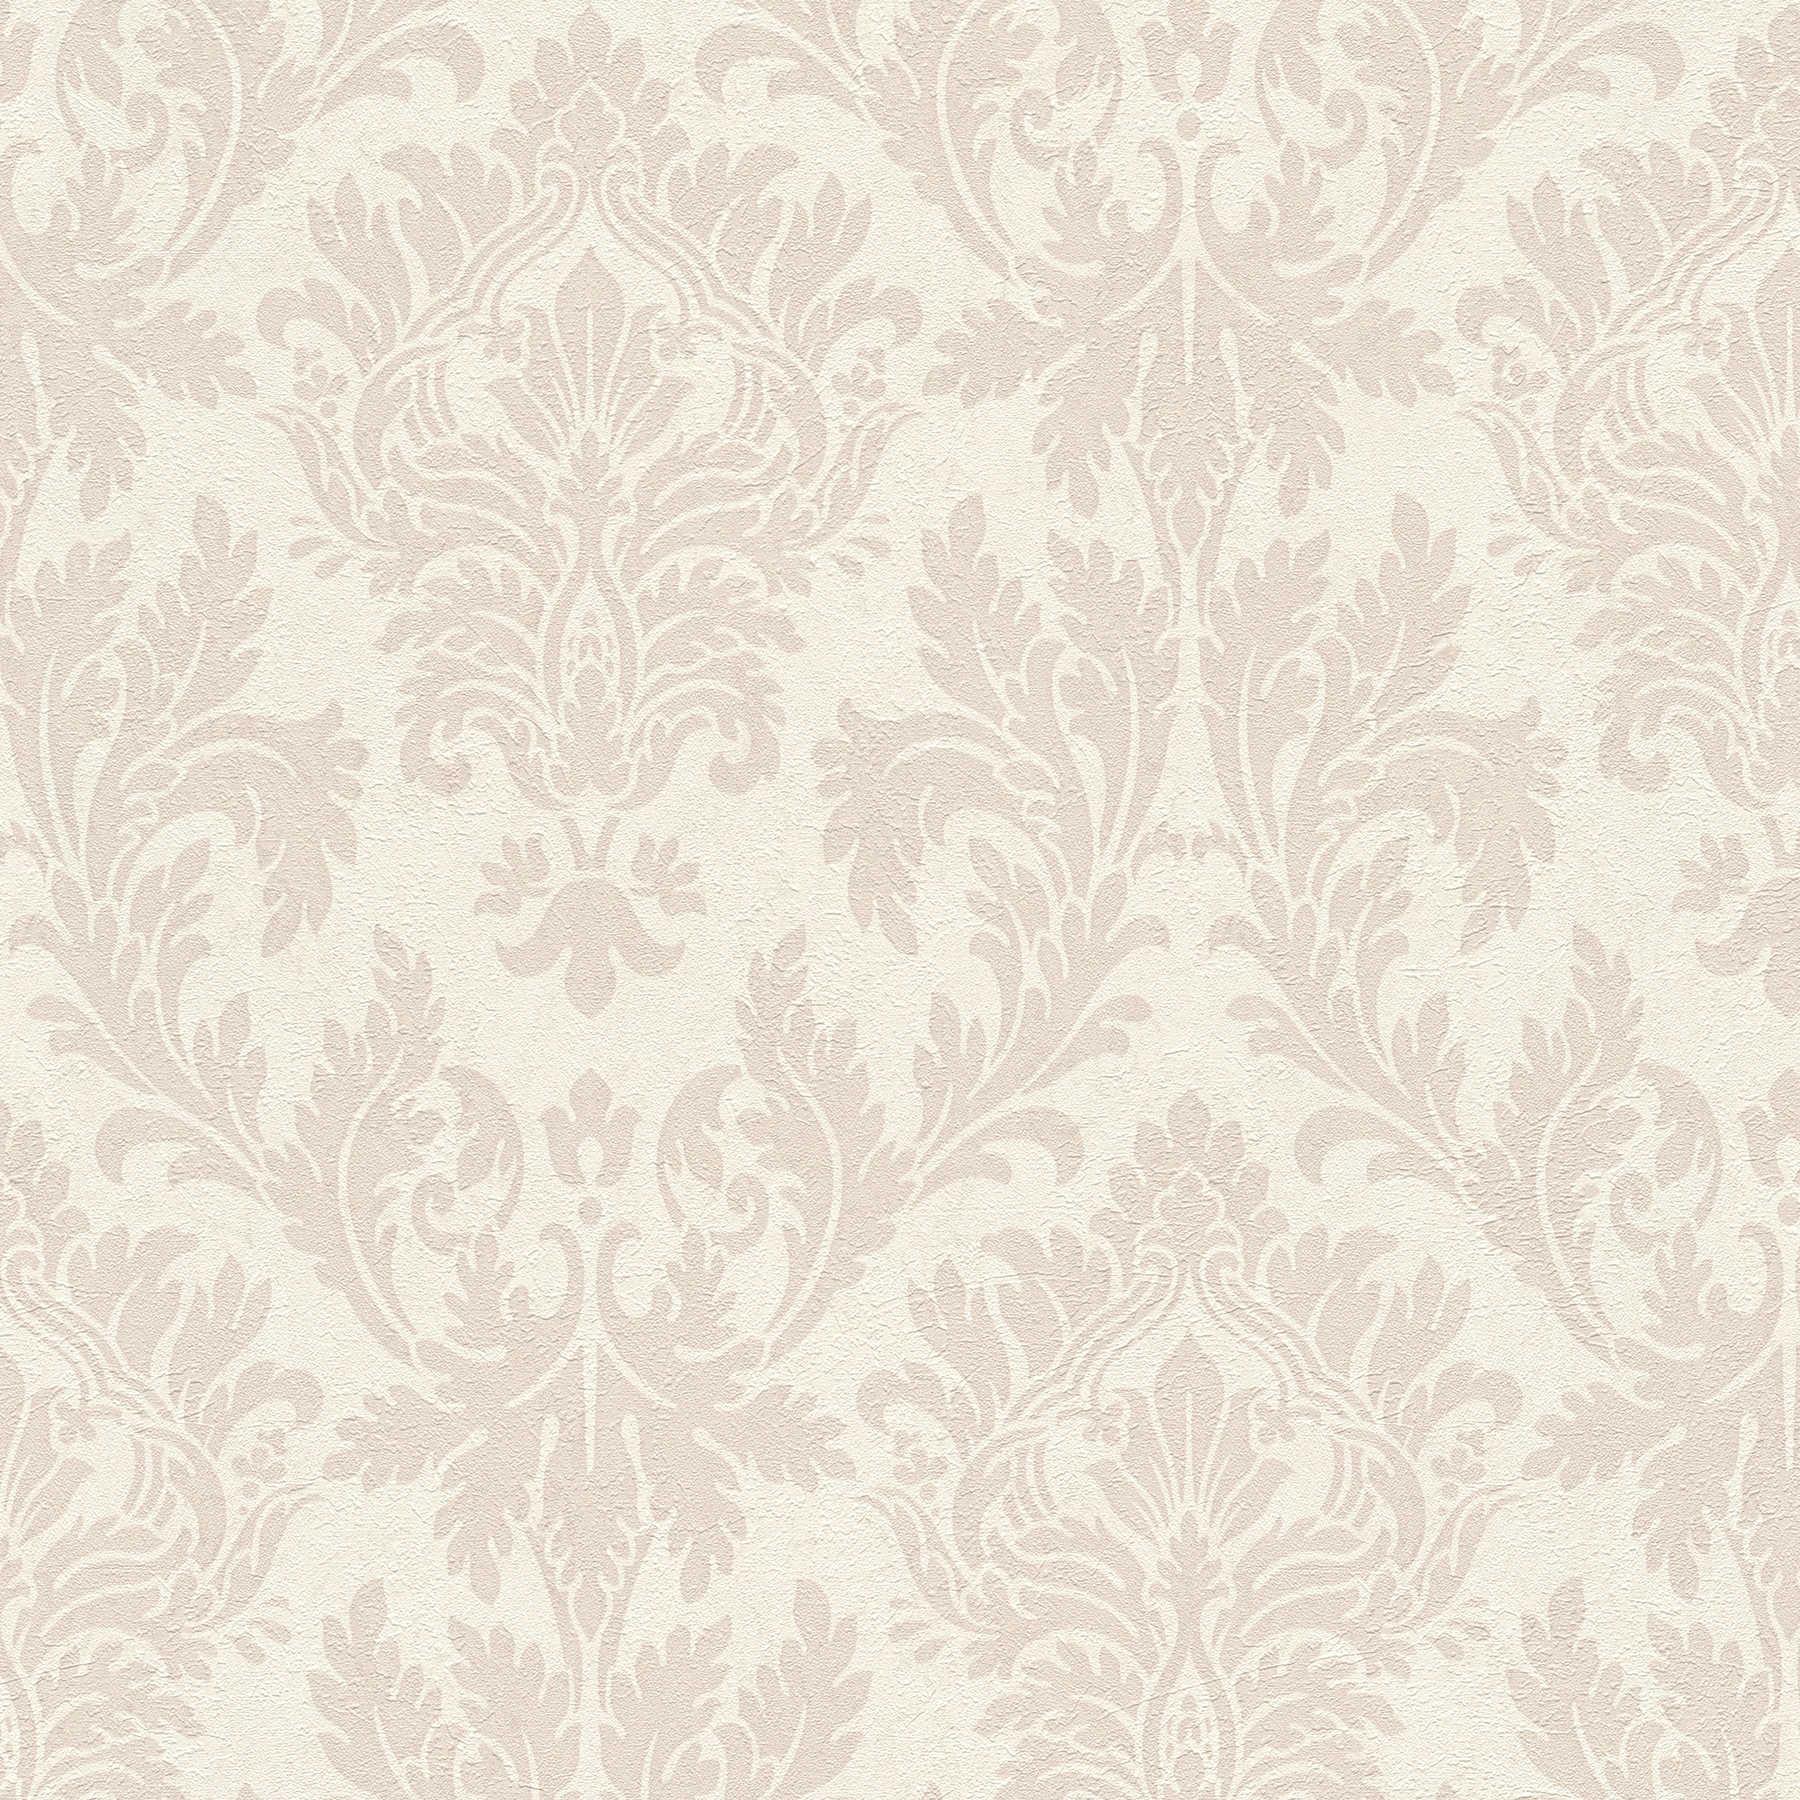 A.S. Creation New Look 326673 Ornament/Beige